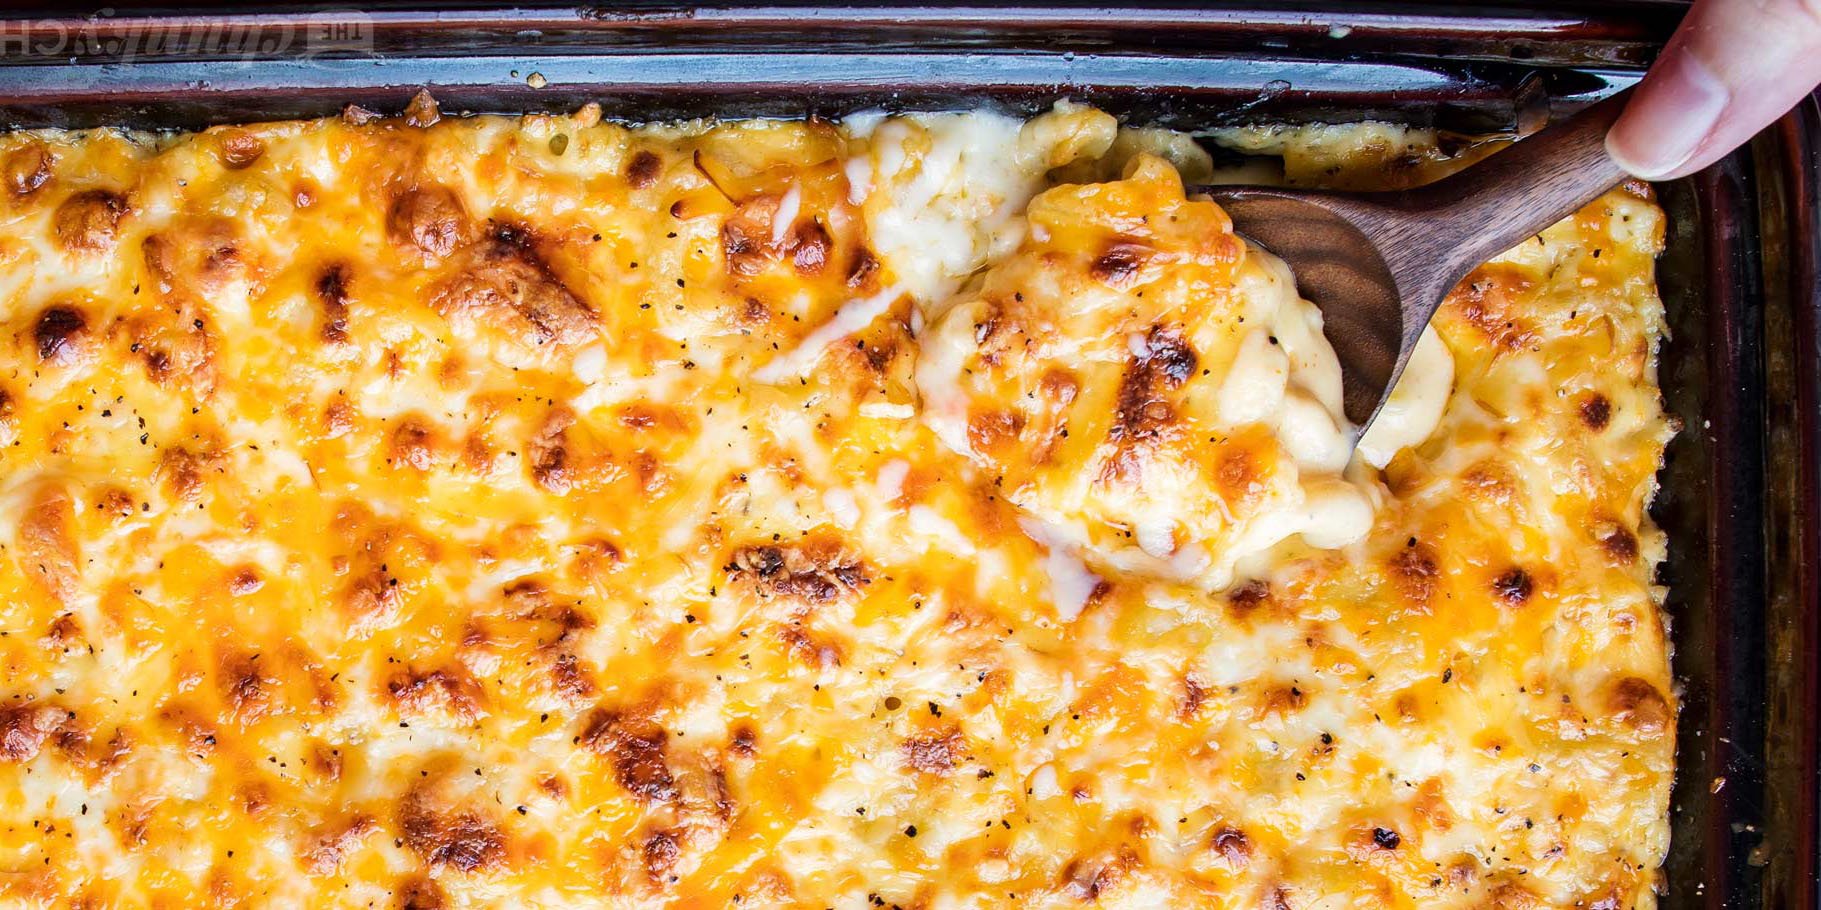 Ultimate-Creamy-Baked-Mac-and-Cheese-baking-dish